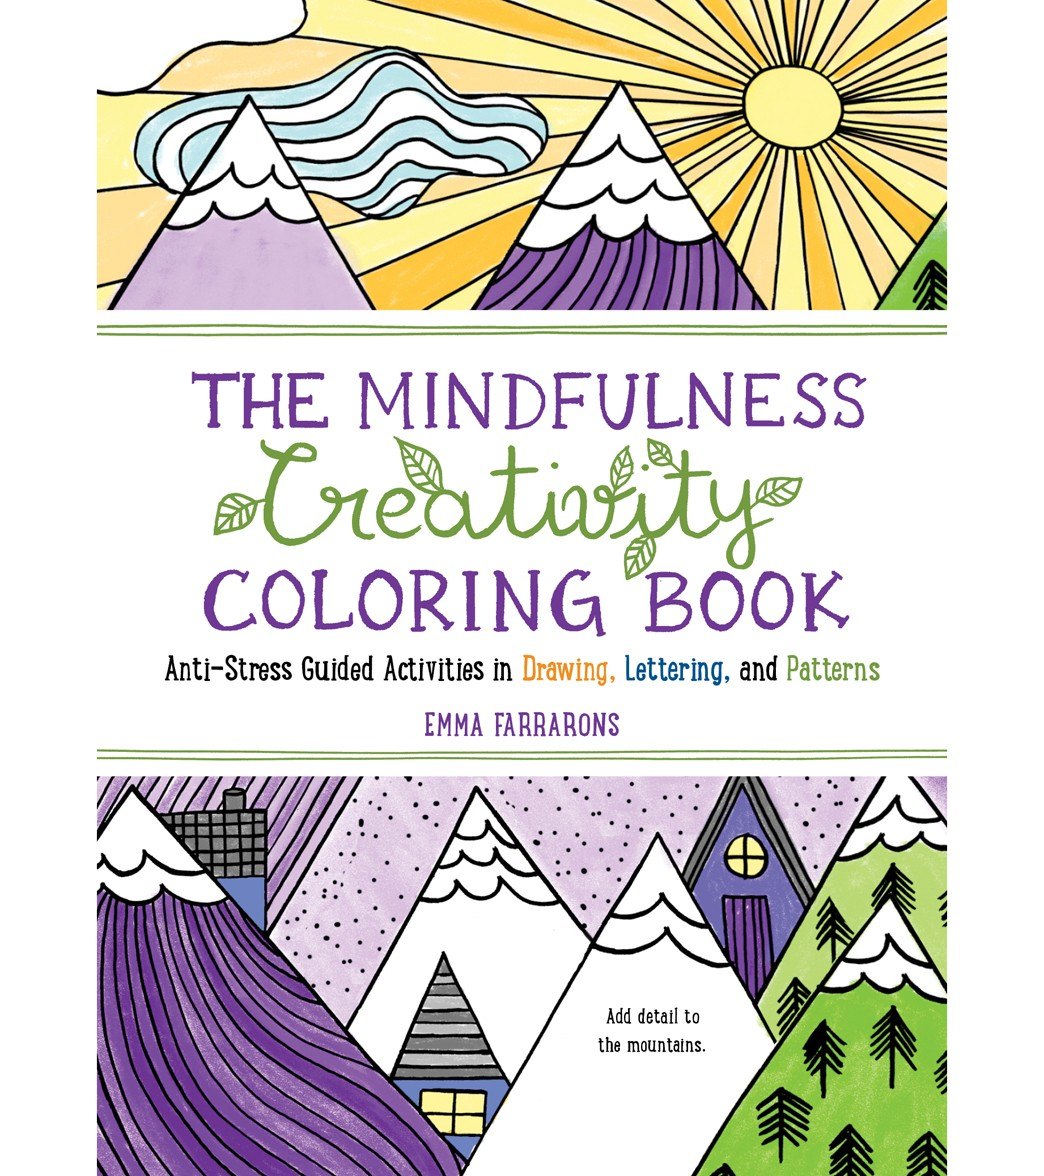 Coloring Book For Teens: Anti-Stress Designs Vol 3 - Art Therapy Coloring